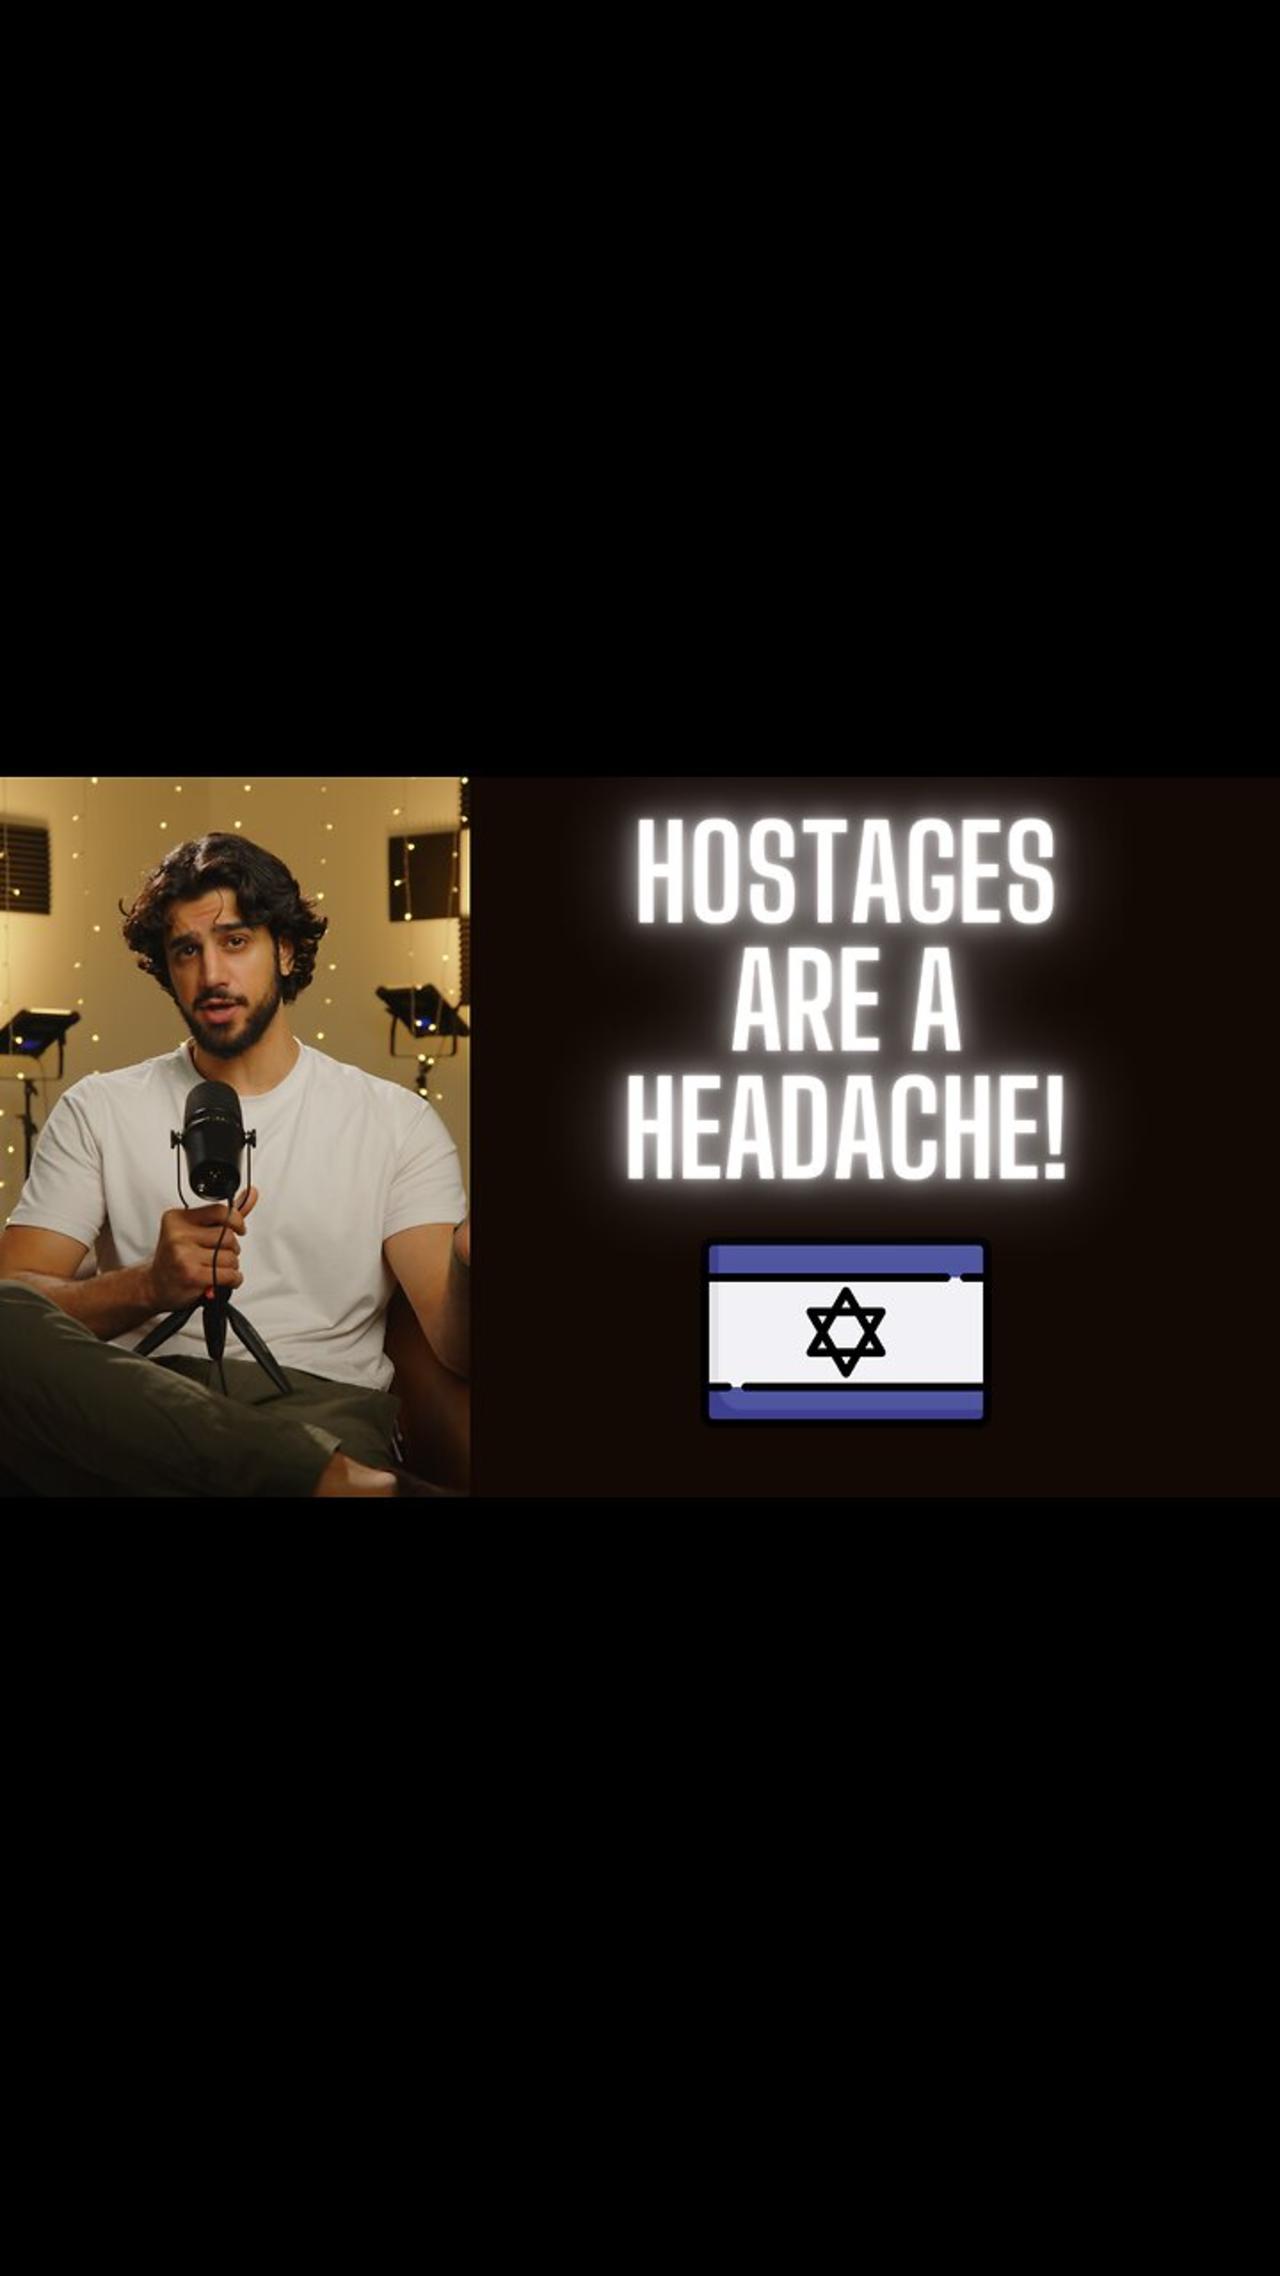 Israel kills its own hostages (PROOF)